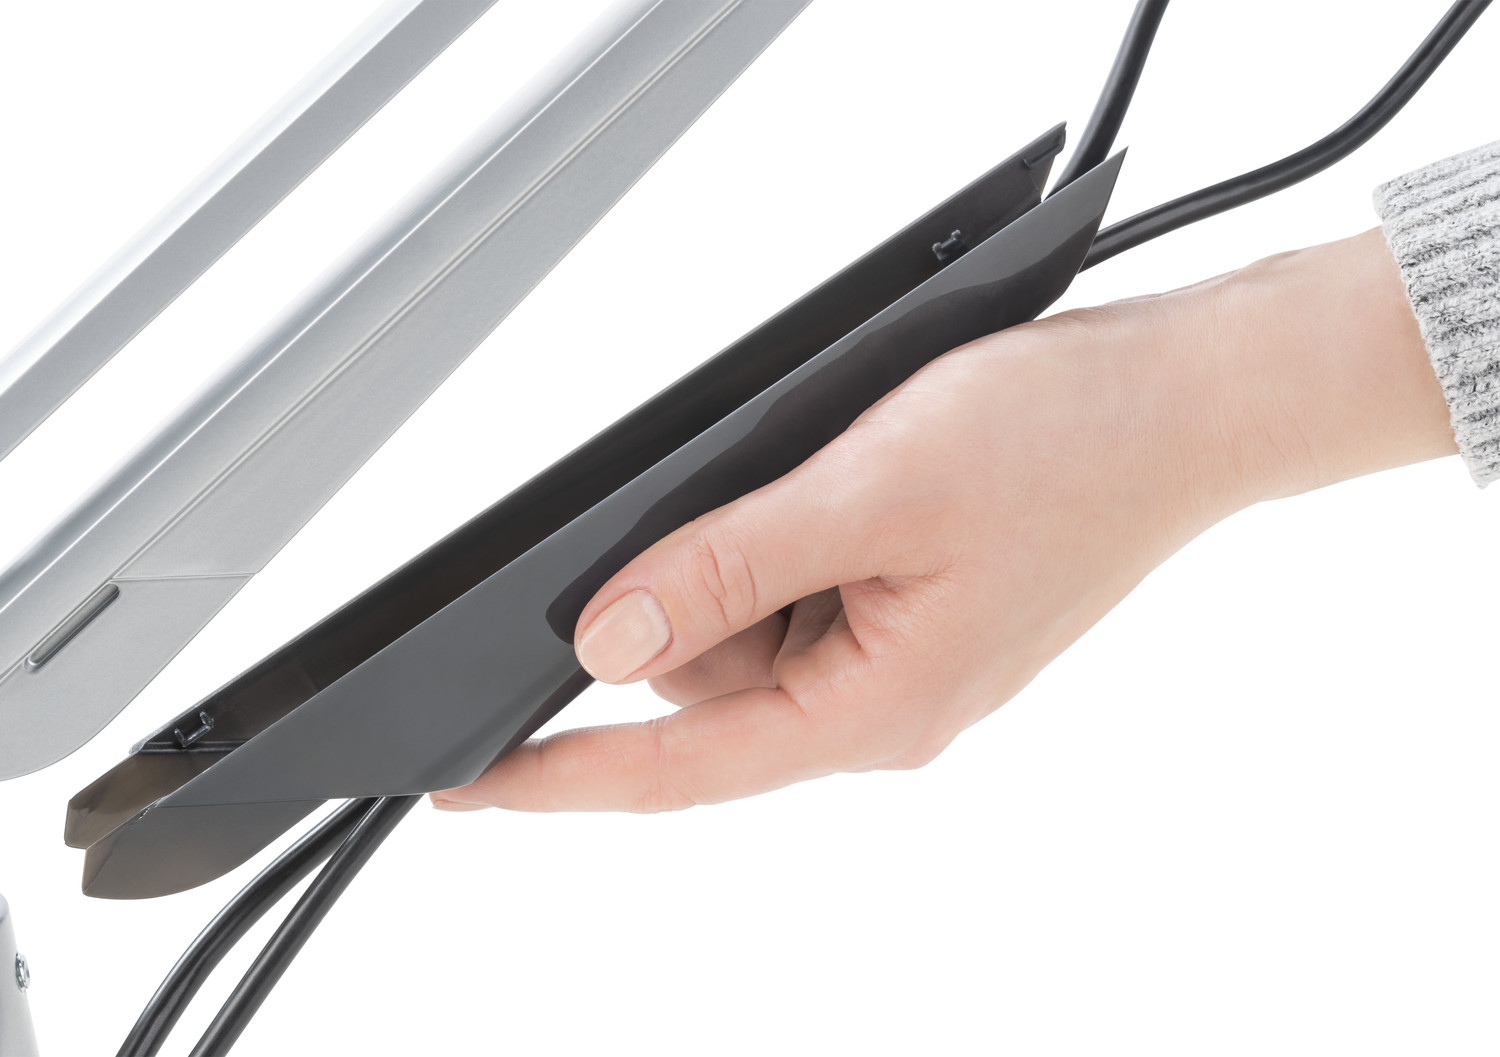 An integrated cable duct keeps the cables almost completely invisible. All connection cables are neatly organised under the discreet cover.